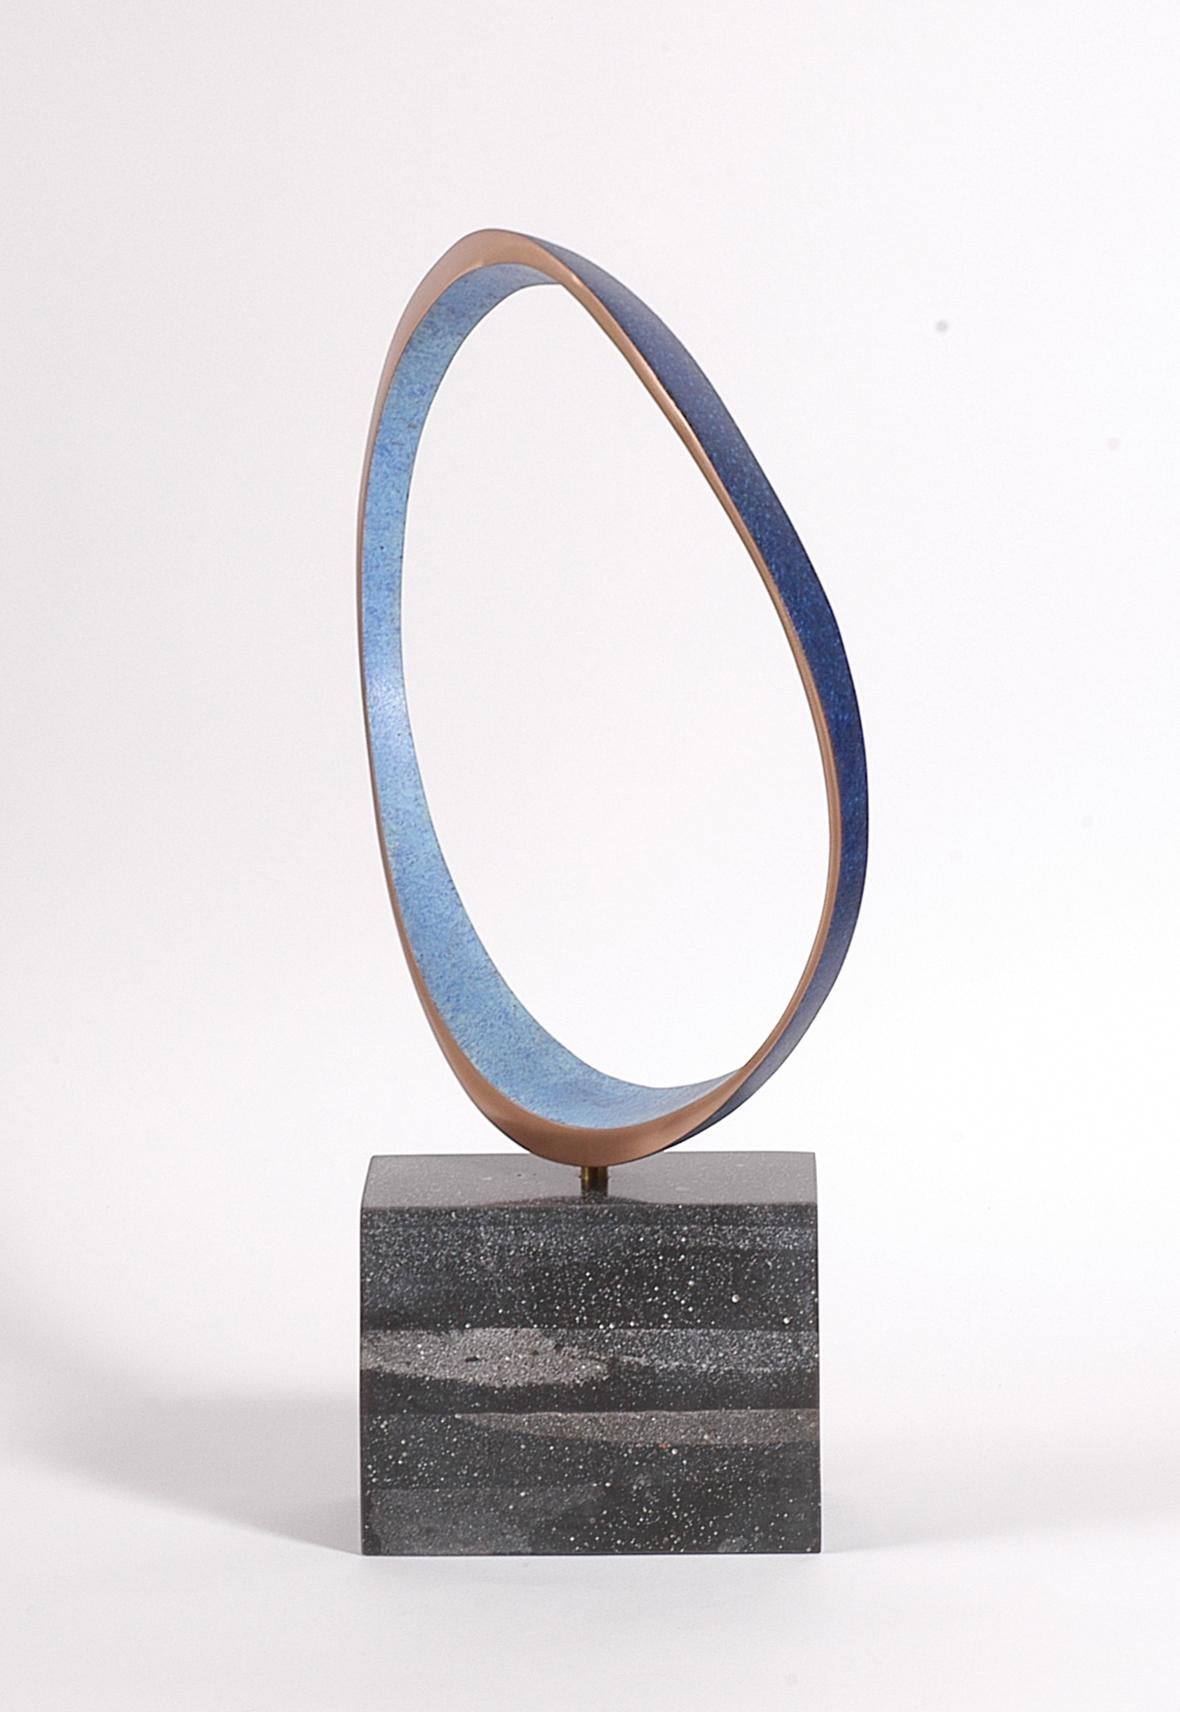 Year 2017
39 high x 25 x 8 cm
Bronze freely rotating on a slate composite base
Edition of 9 variations
Stamped with monogram signature and uniquely numbered 549, 4/9
The edges of this sculpture are finely rubbed natural bronze and lacquered. clear